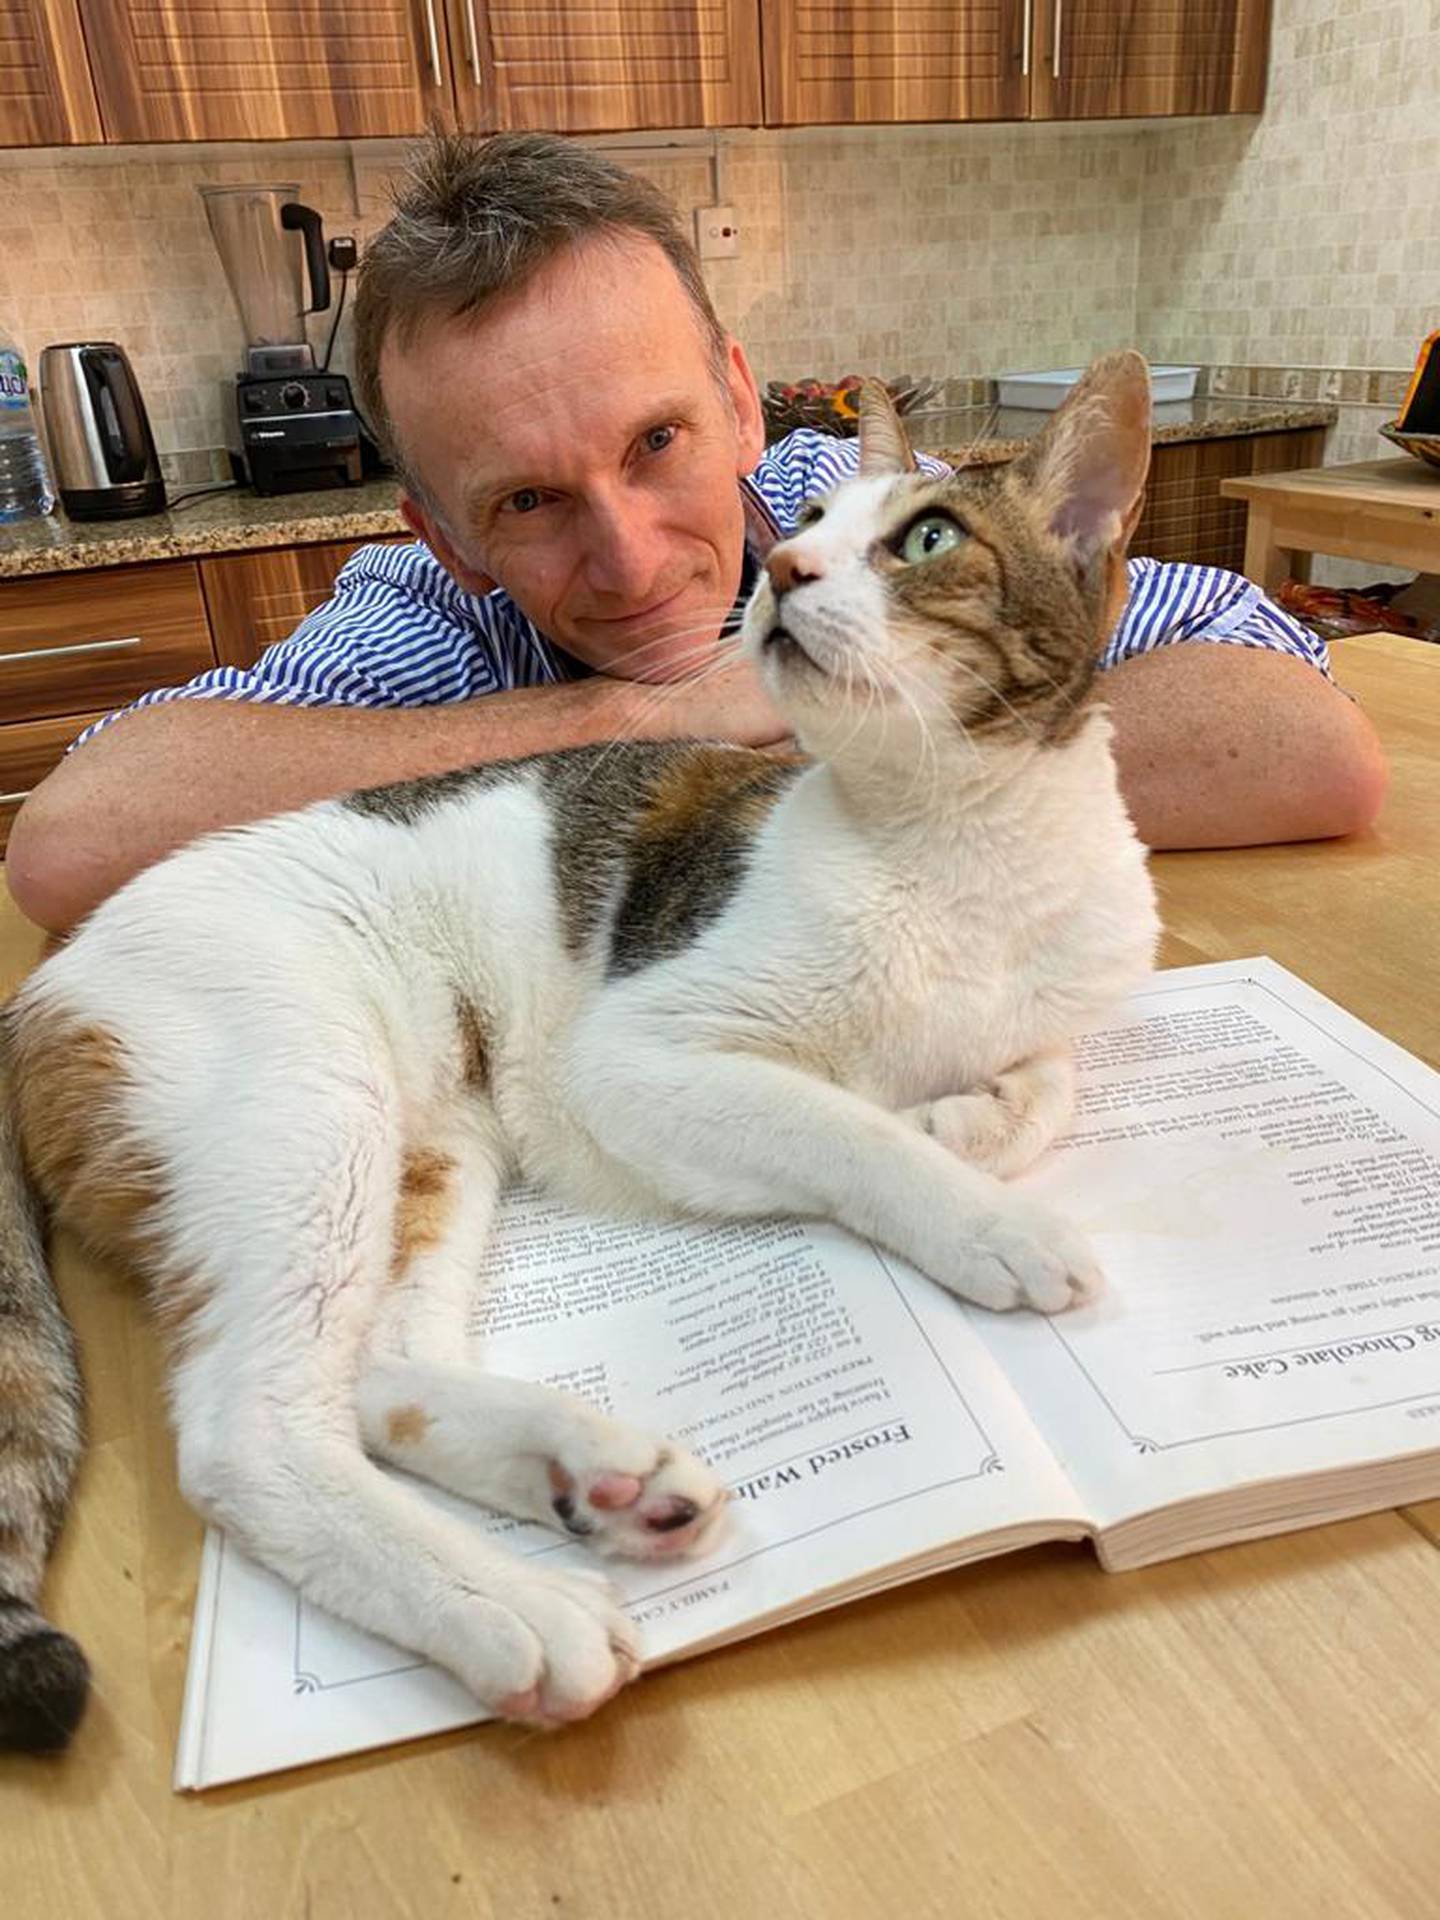 British Veterinary Centre's Dr Martin Wyness and his cat, Ting Tong. Courtesy Martin Wyness